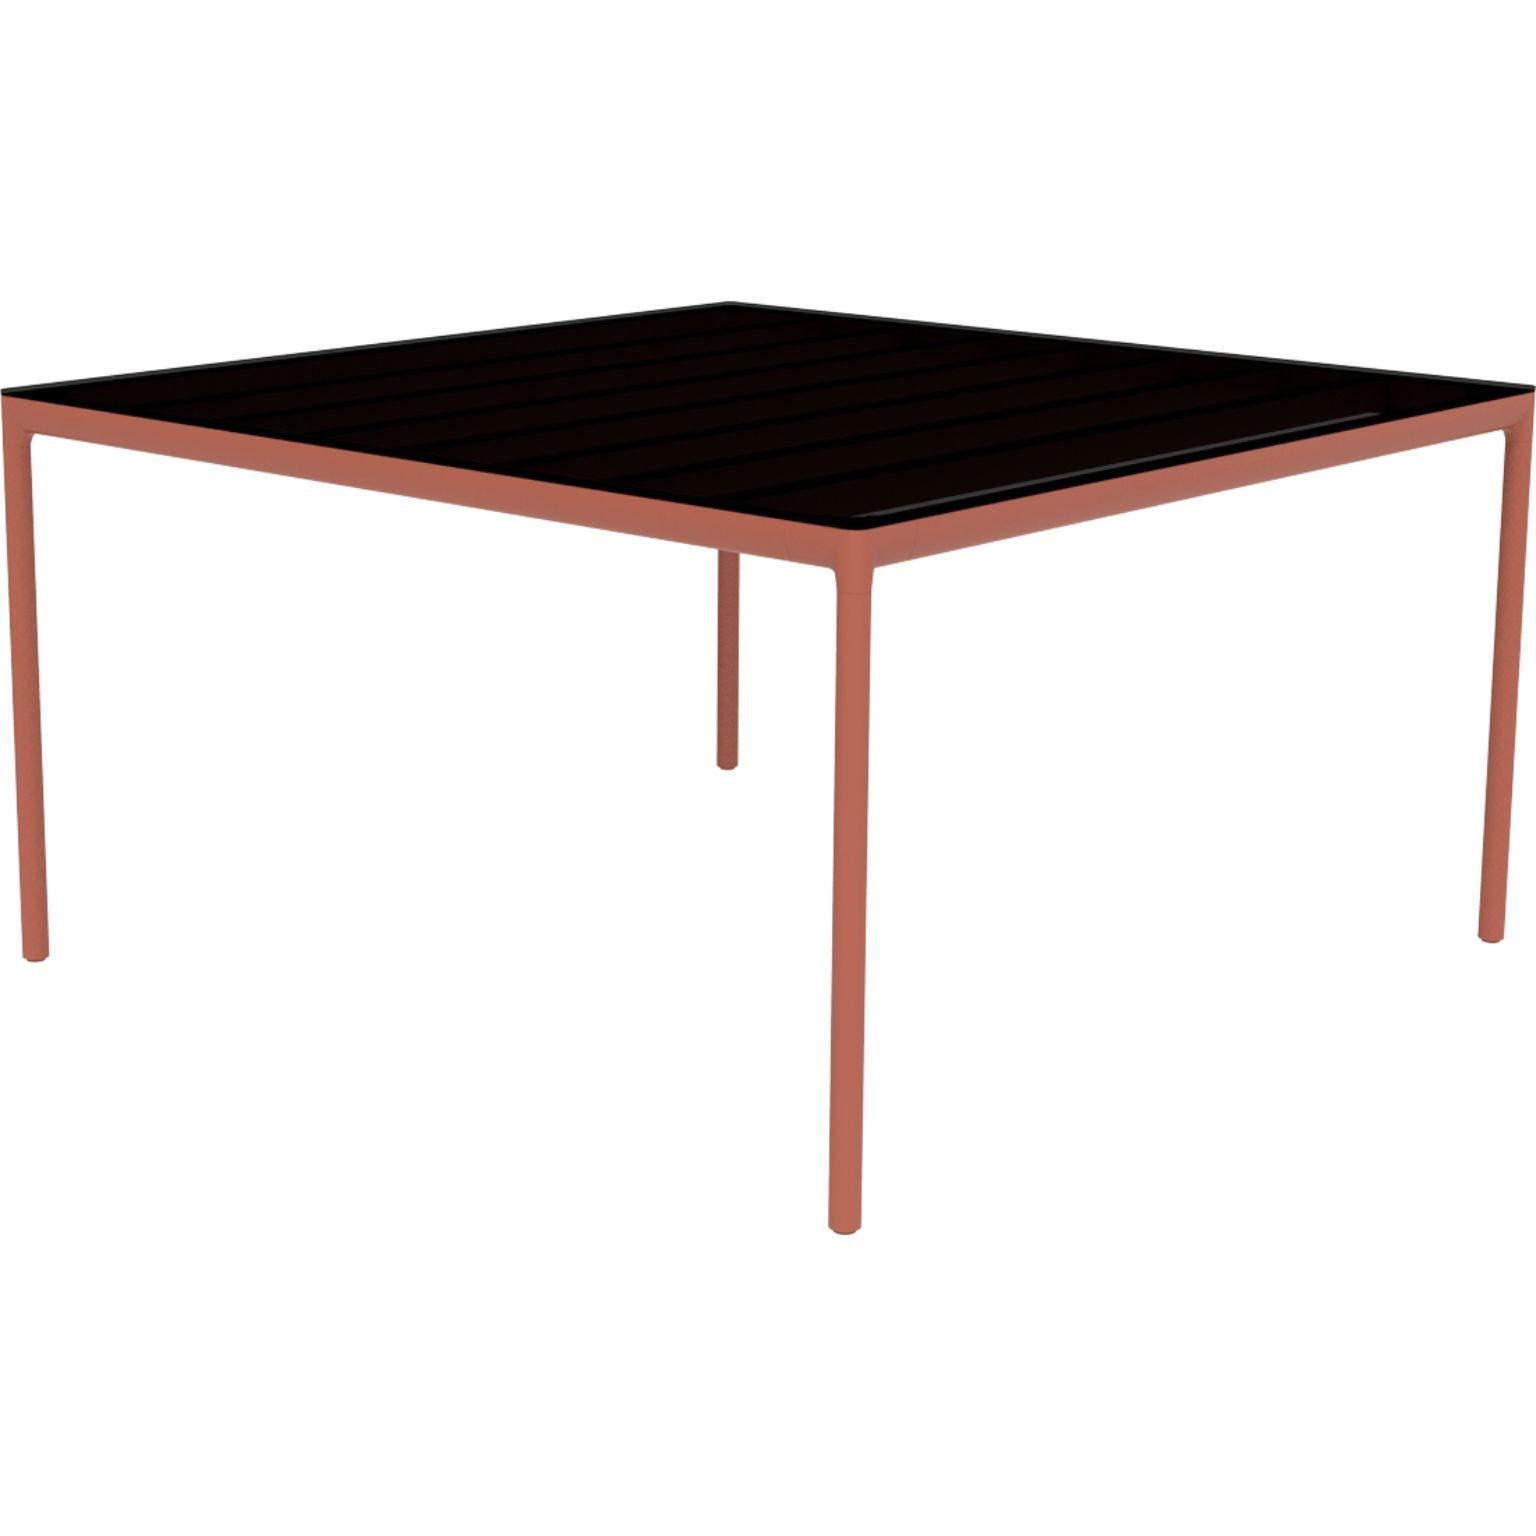 Ribbons Salmon 138 coffee table by MOWEE
Dimensions: D138 x W138 x H75 cm.
Material: Aluminum and HPL top.
Weight: 23 kg.
Also available in different colors and finishes. (HPL Black Edge or Neolith top).

An unmistakable collection for its